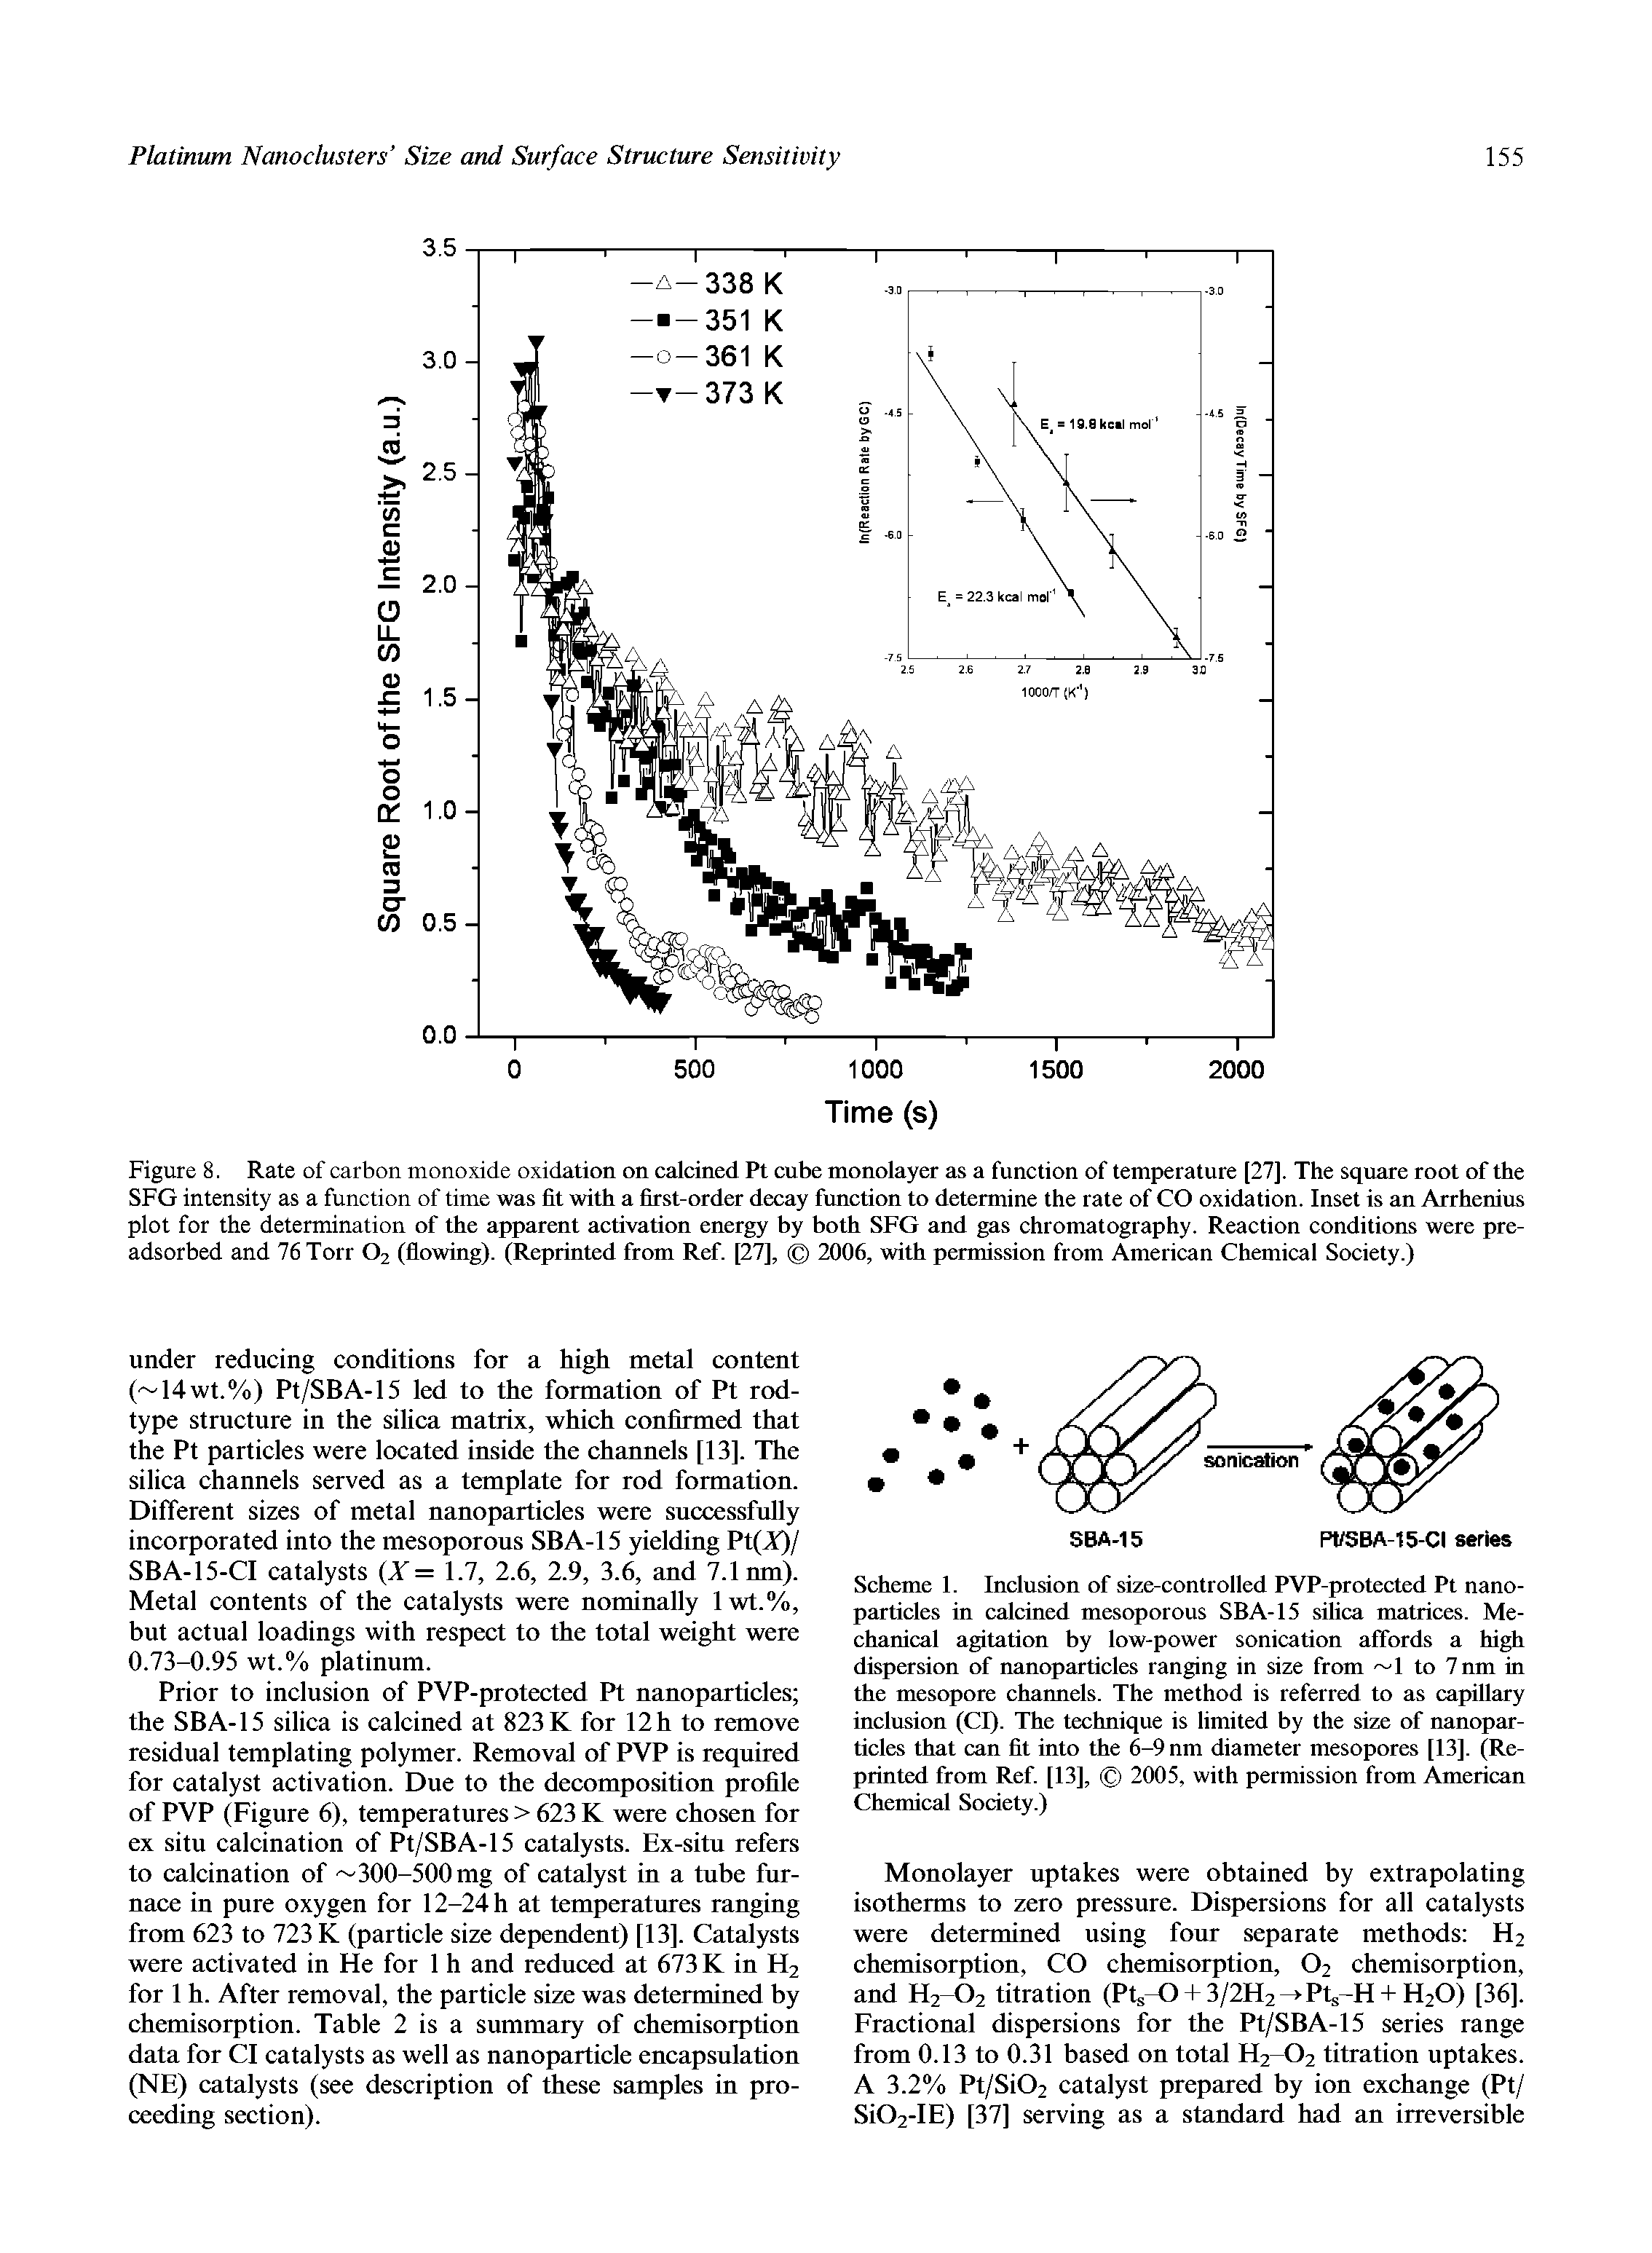 Scheme 1. Inclusion of size-controlled PVP-protected Pt nanoparticles in calcined mesoporous SBA-15 silica matrices. Mechanical agitation by low-power sonication affords a high dispersion of nanoparticles ranging in size from 1 to 7nm in the mesopore channels. The method is referred to as capillary inclusion (Cl). The technique is limited by the size of nanoparticles that can fit into the 6-9 nm diameter mesopores [13]. (Reprinted from Ref [13], 2005, with permission from American Chemical Society.)...